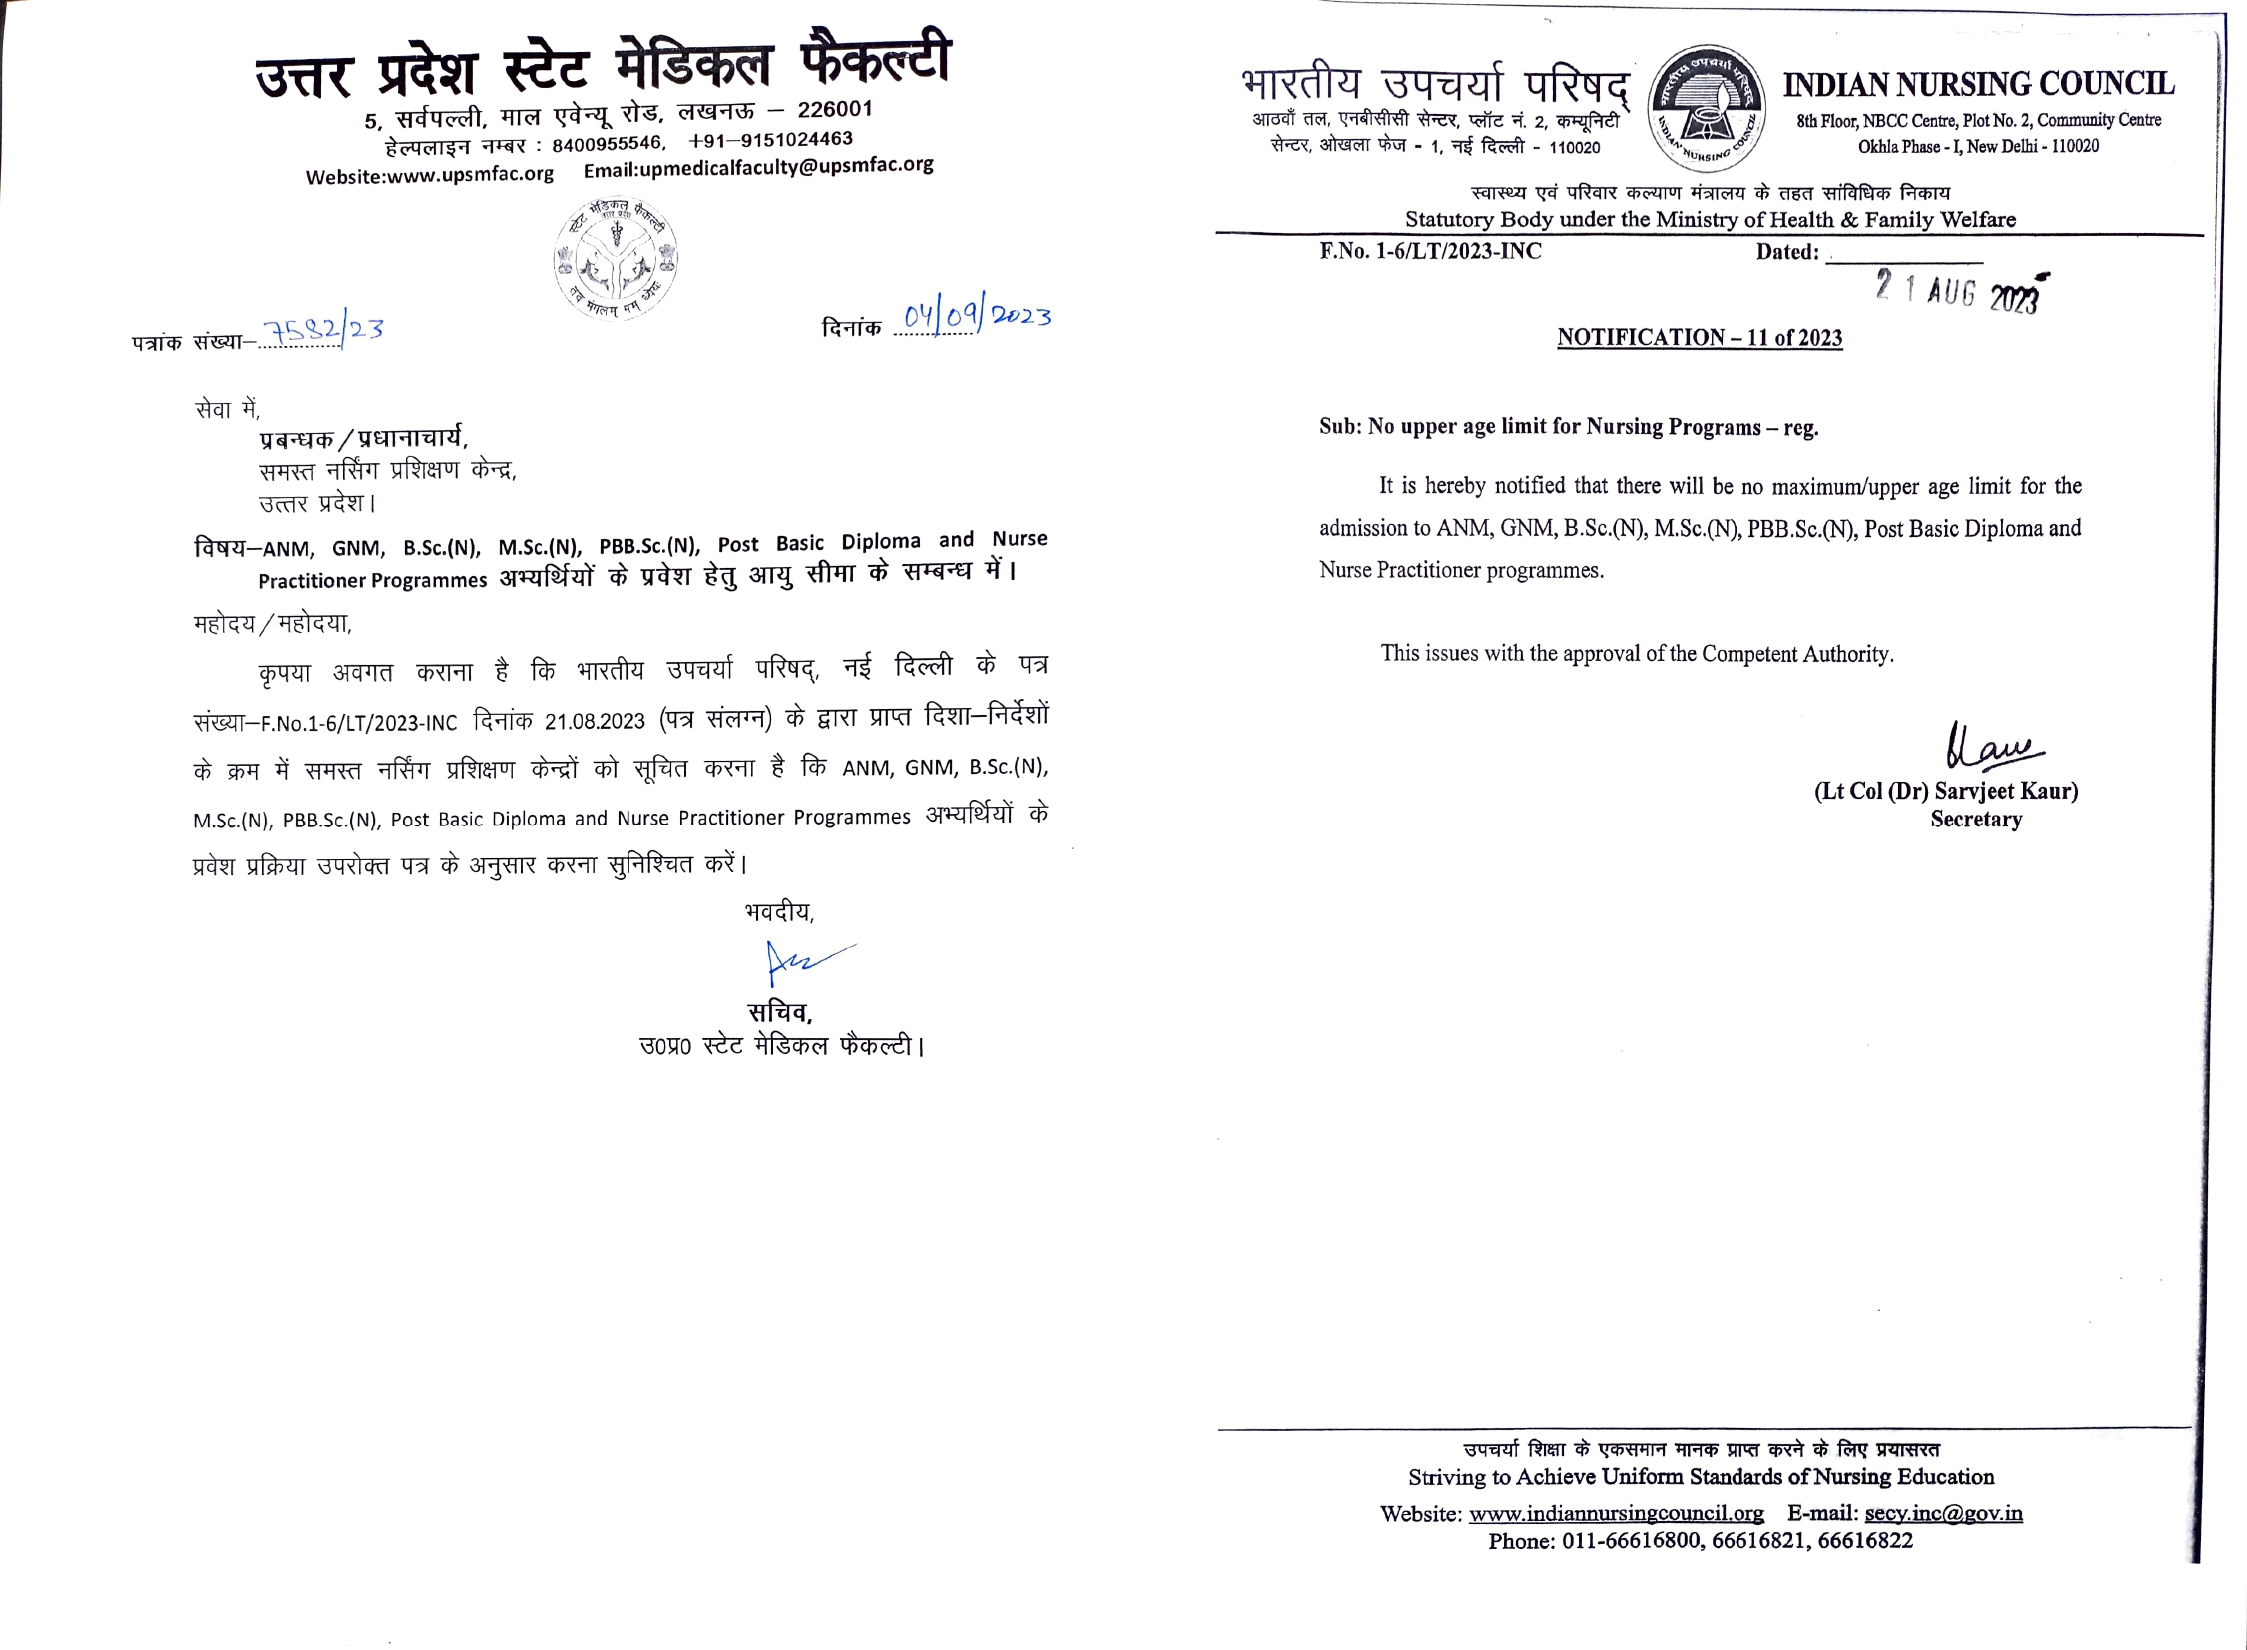 Circular for Age Limit of Nursing Courses